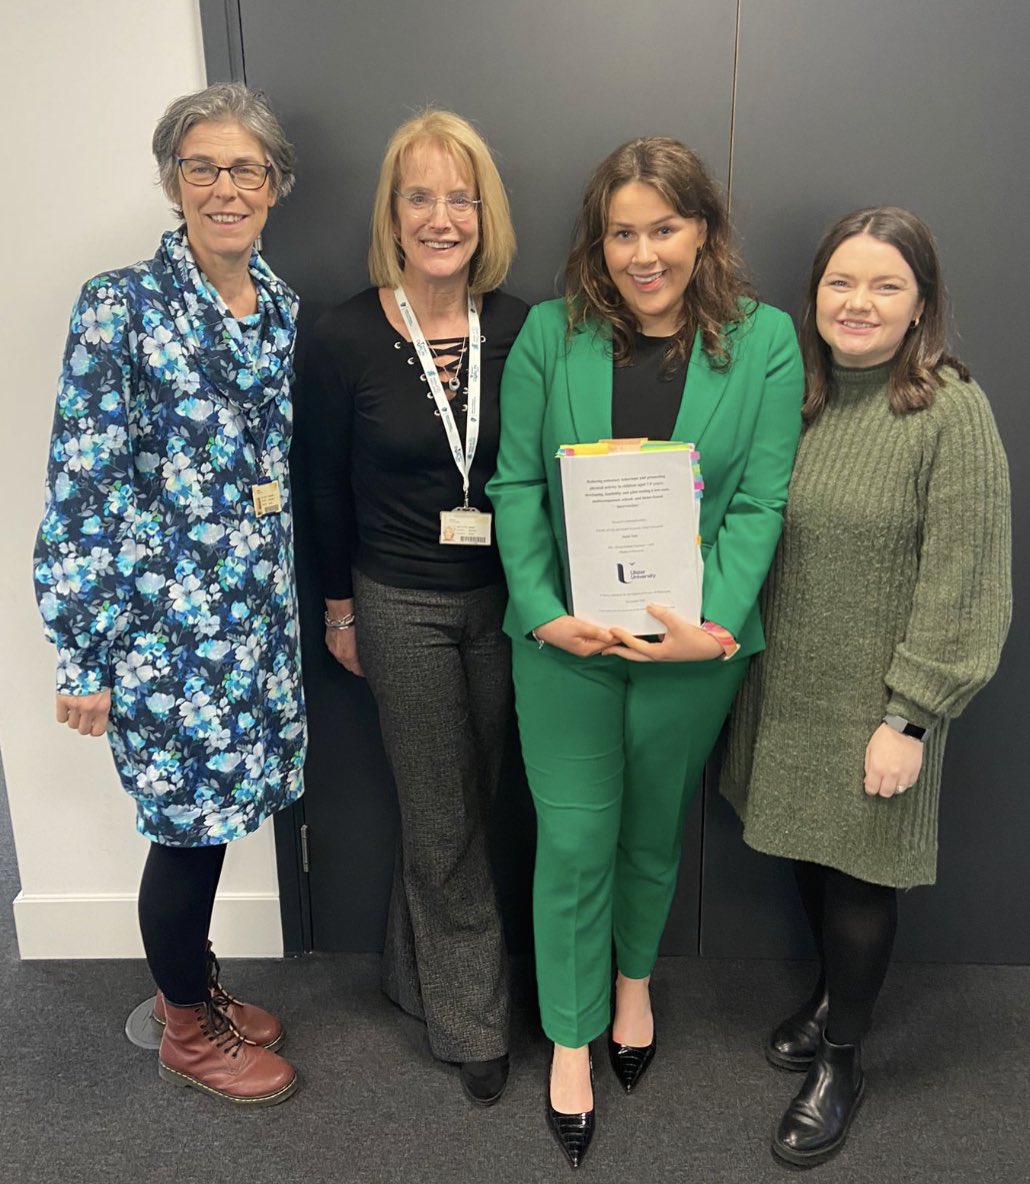 ⭐️PHD VIVA⭐️ We are thrilled to announce that @NallyS5 successfully defended her PhD thesis today “⬇️ sedentary behaviour & ⬆️ physical activity in children aged 7-9 years: developing, feasibility & pilot testing a low-cost, multicomponent, school- & home-based intervention.”👏